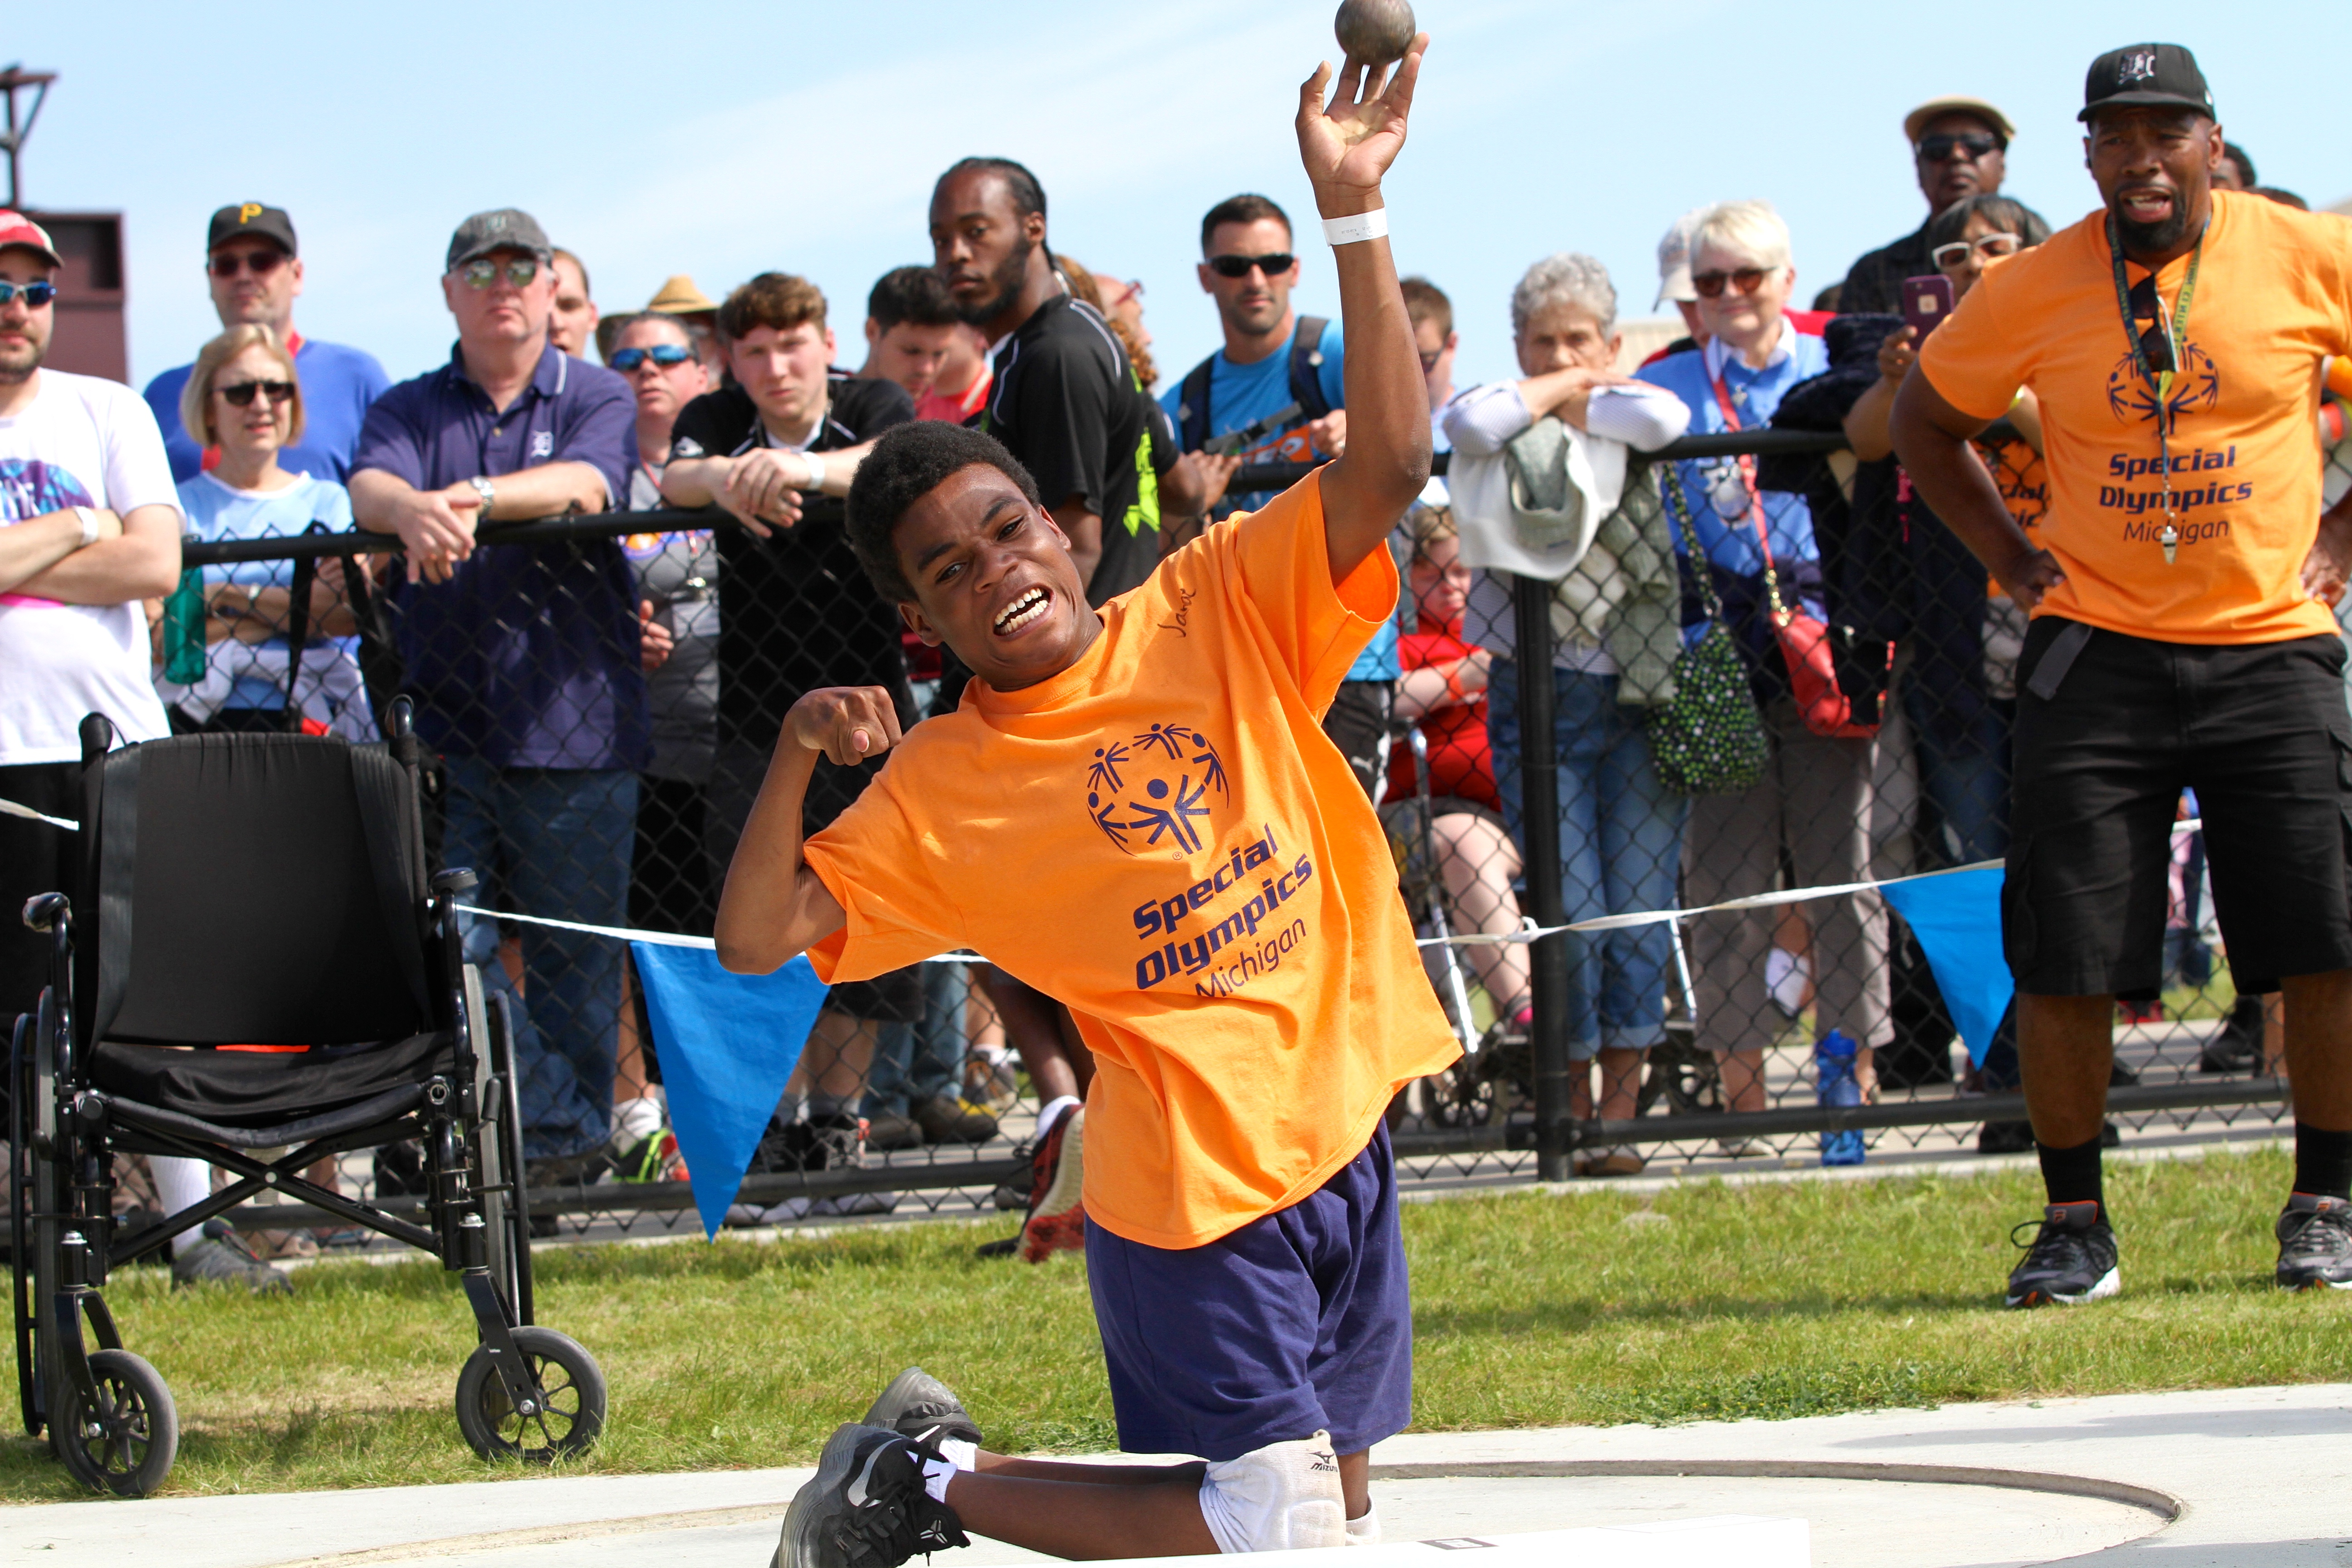 Special Olympics Michigan State Summer Games at Central Michigan University in Mt. Pleasant, Michigan.